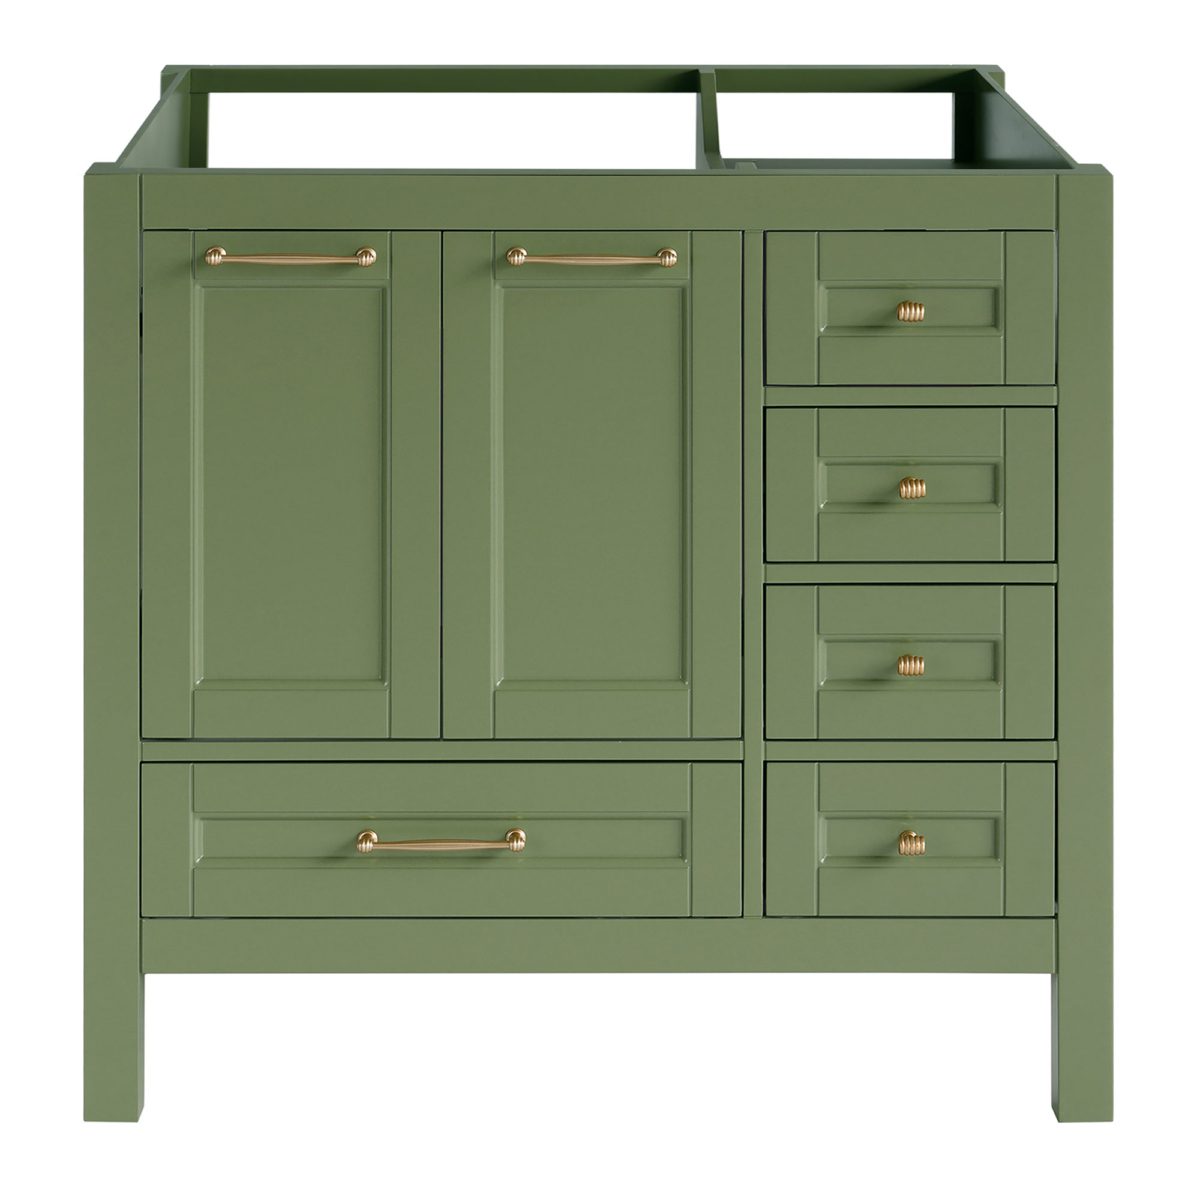 36 inch Green Single Sink Vanity without top a